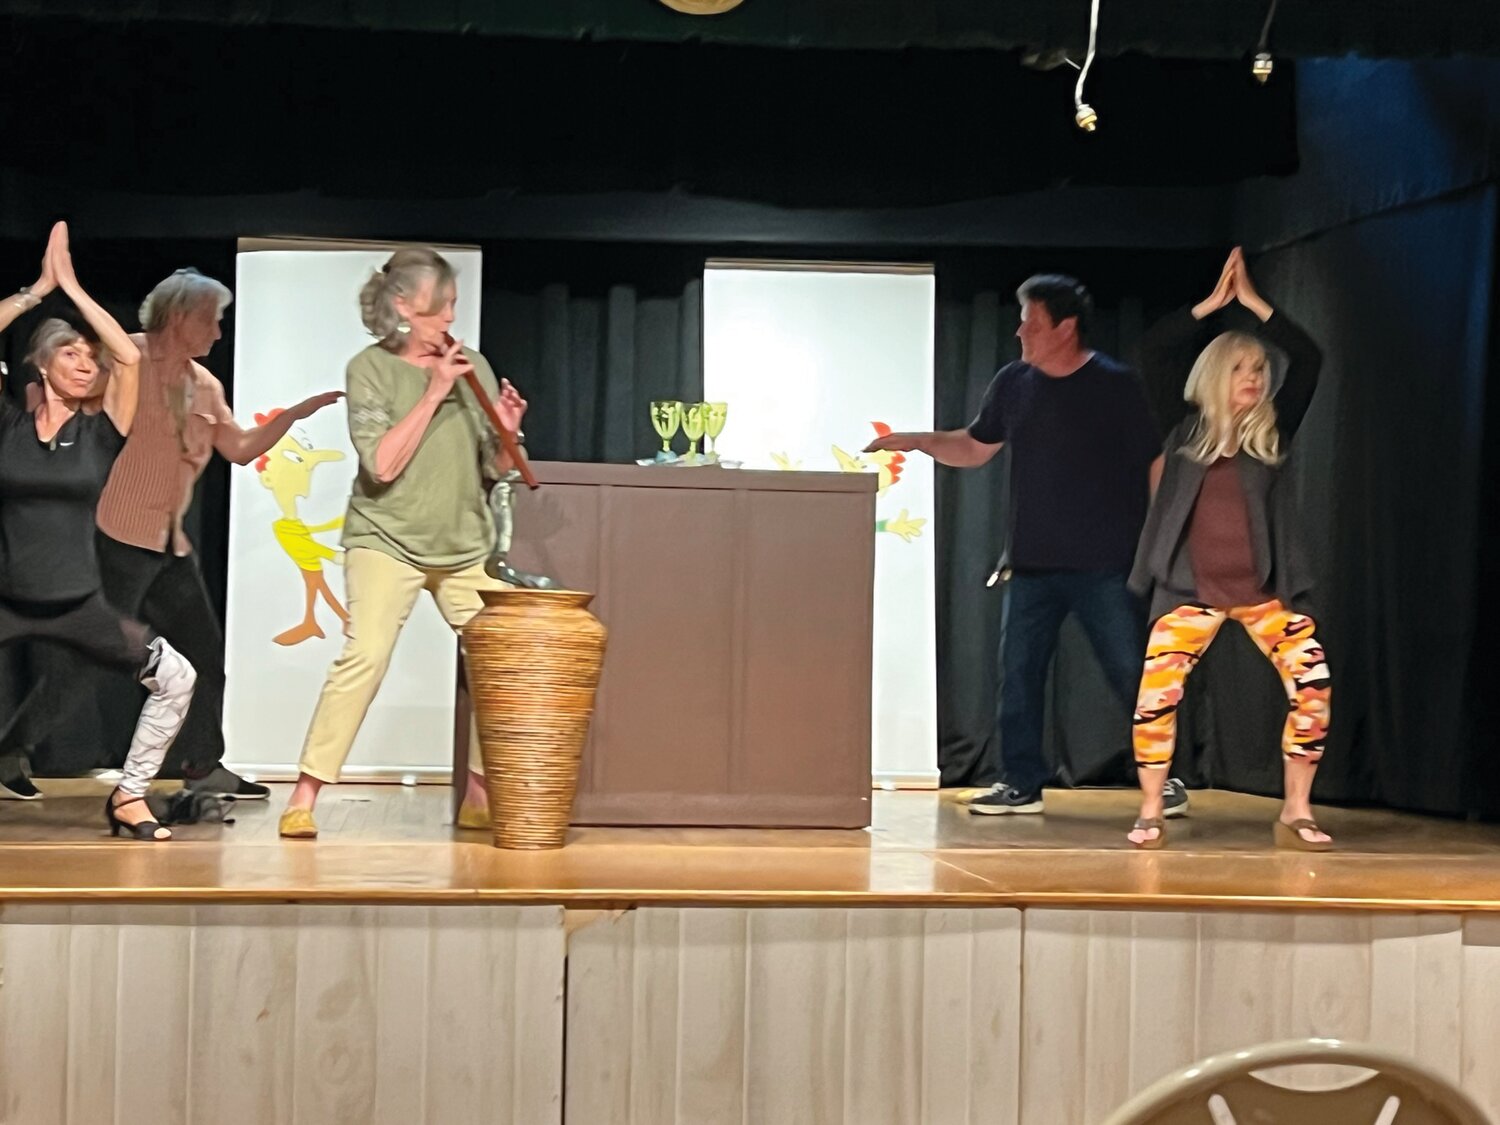 “Now That’s Funny!” the spring musical comedy presented by Drama at Phillips’ Mill, continues through May 20.